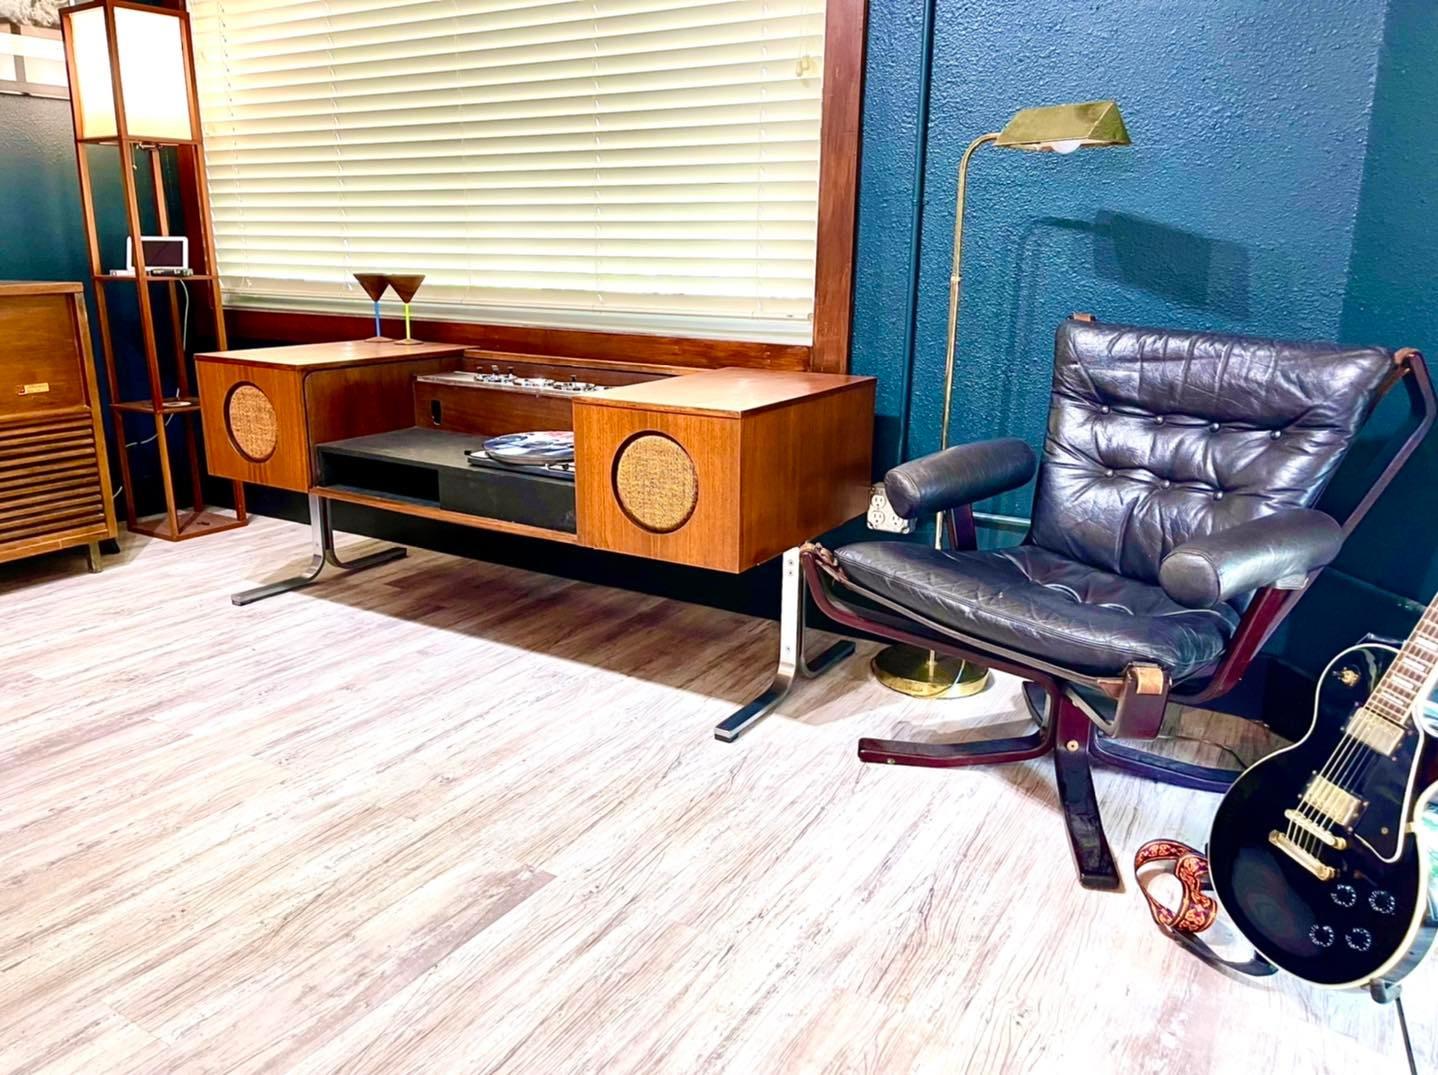 Woodwork Radiogram Stereo Record Player 